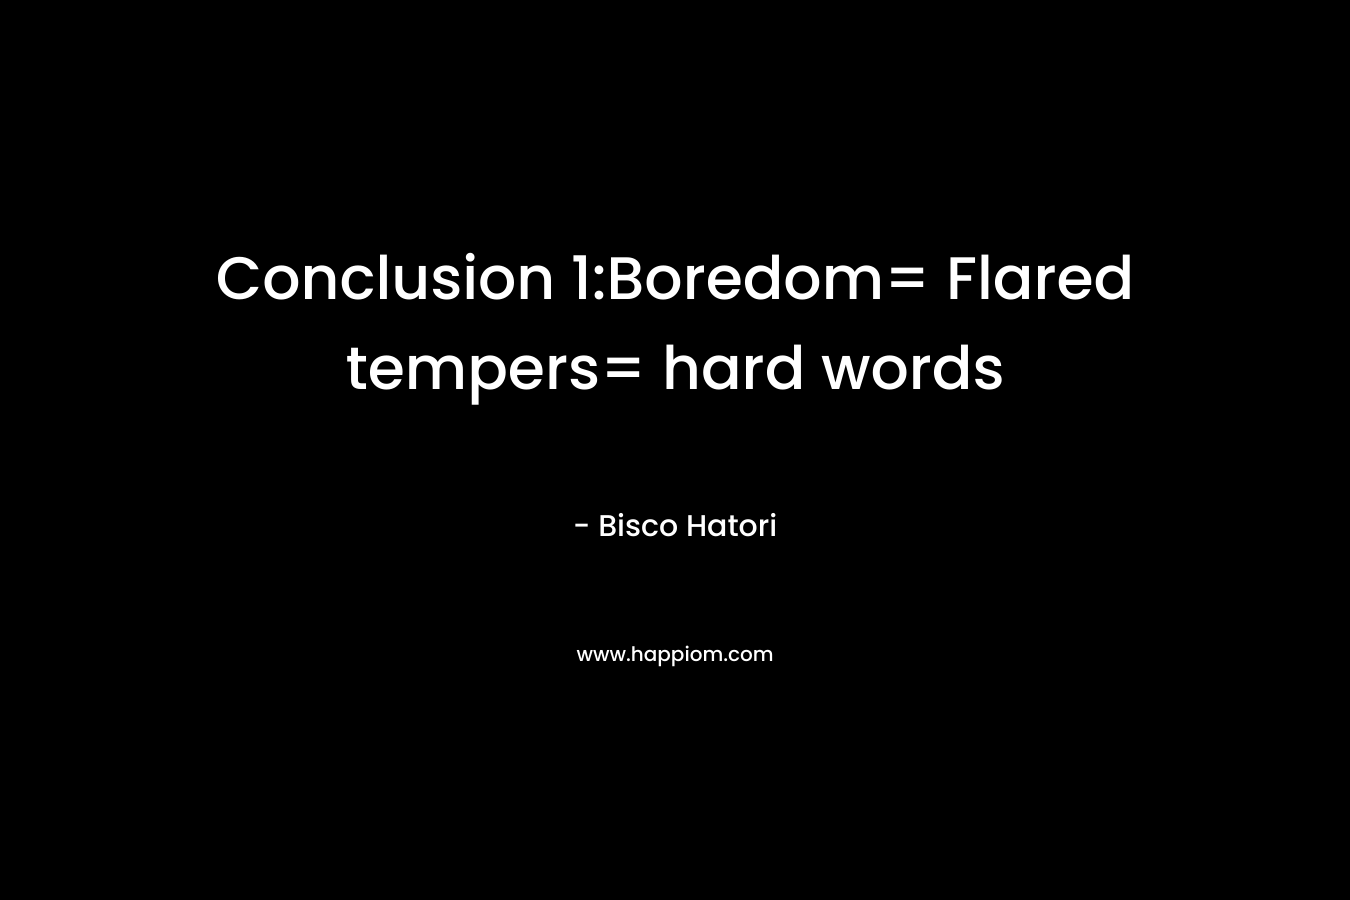 Conclusion 1:Boredom= Flared tempers= hard words